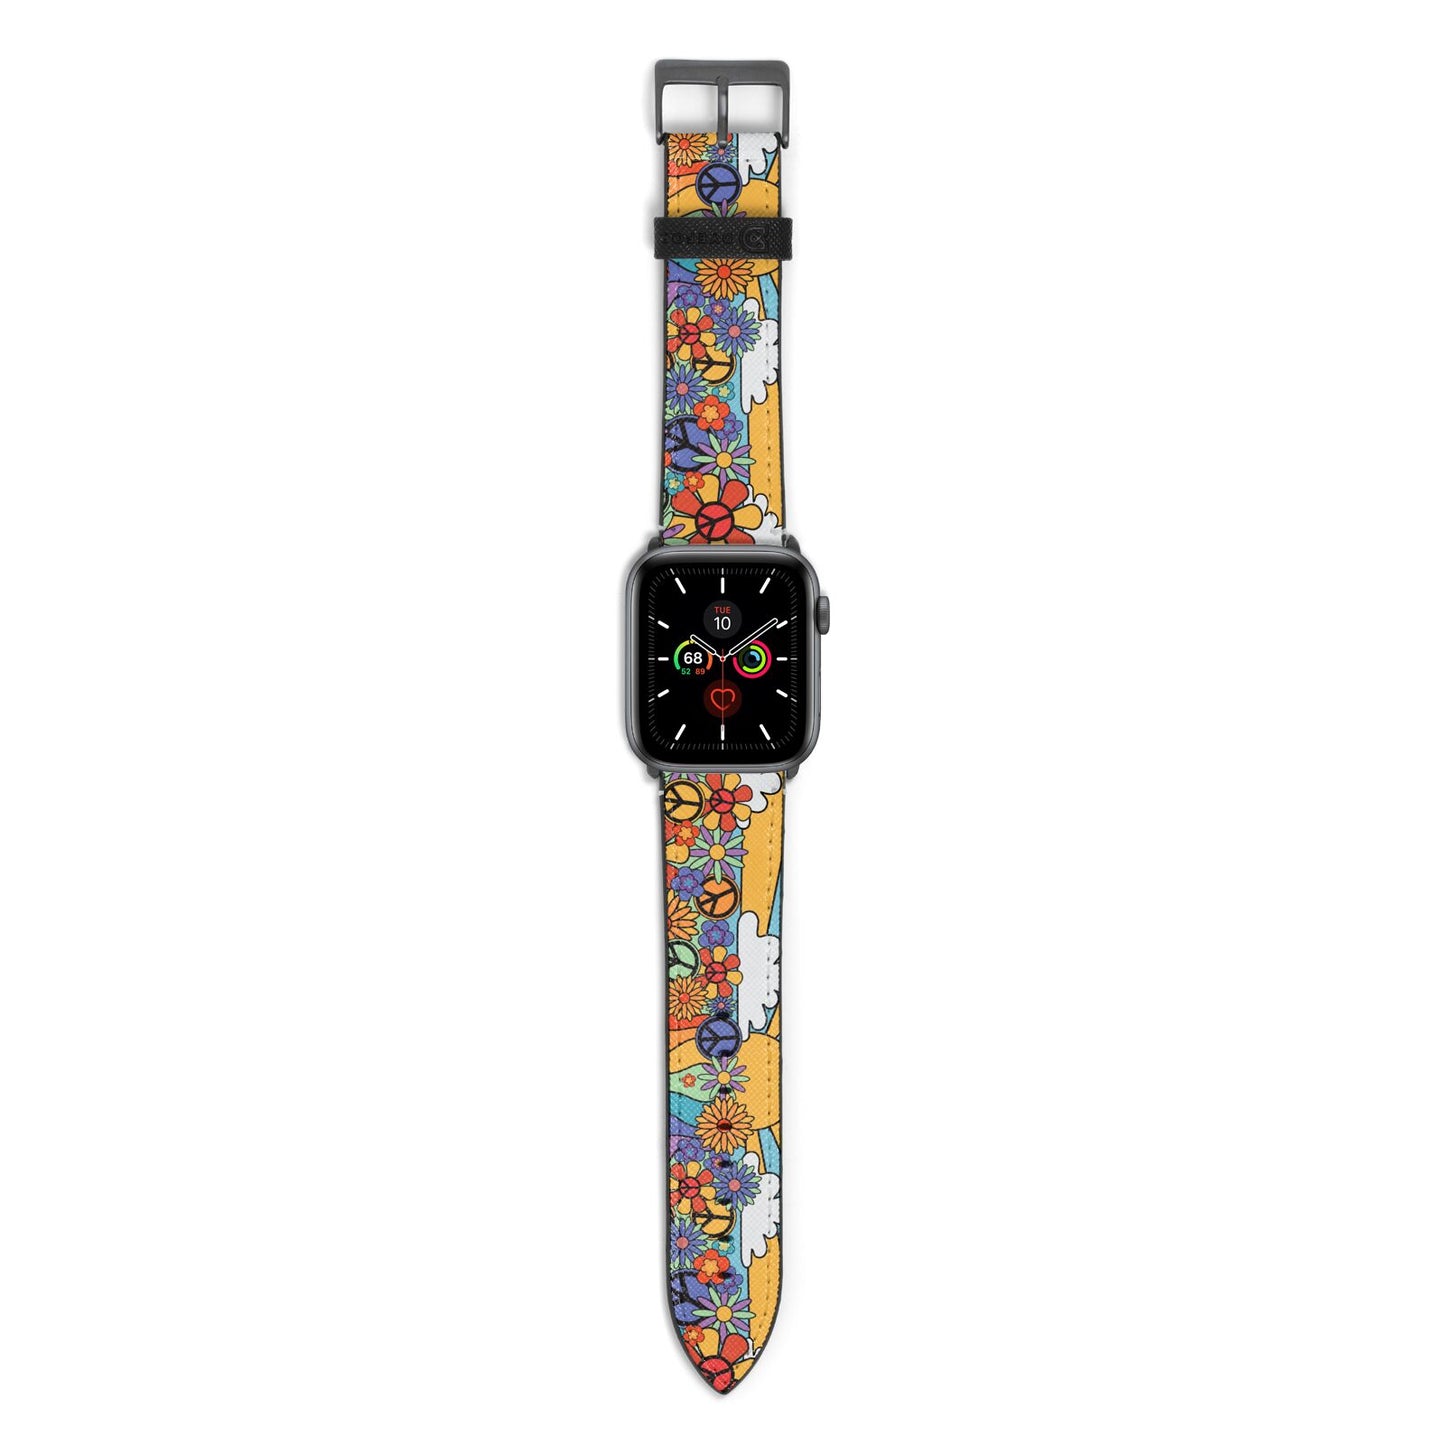 Seventies Groovy Retro Apple Watch Strap with Space Grey Hardware